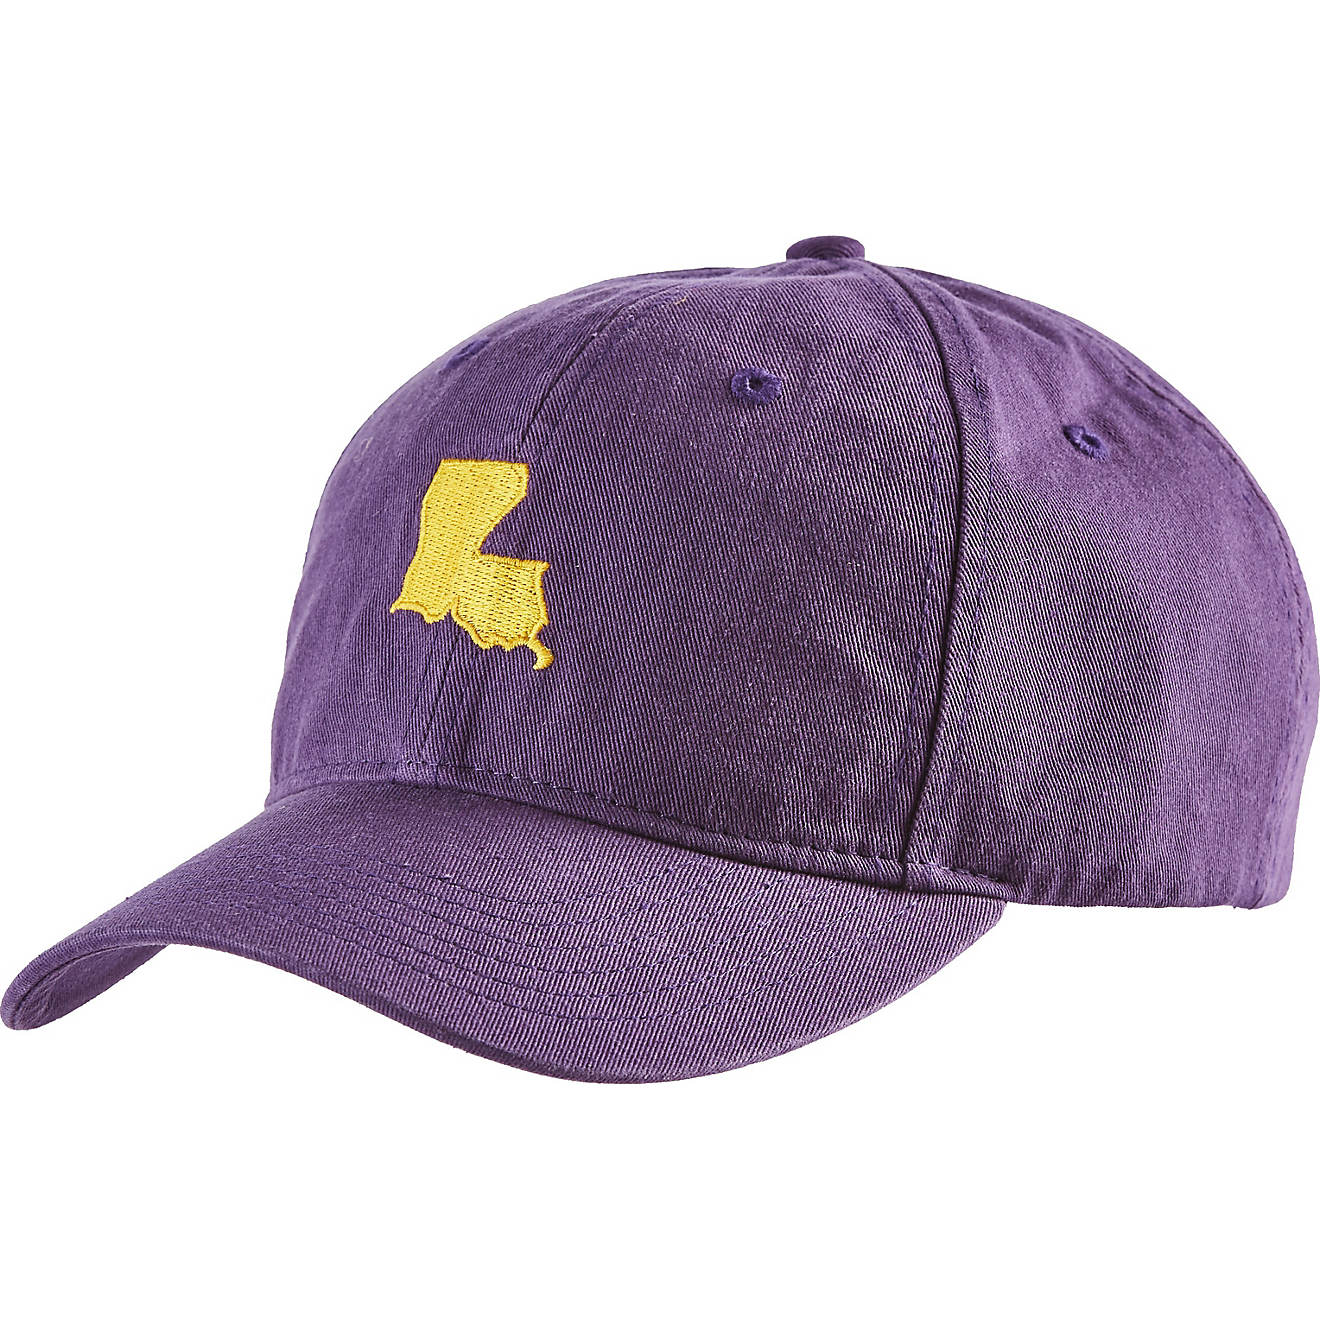 Academy Sports + Outdoors Men's Louisiana State Outline Cap                                                                      - view number 1